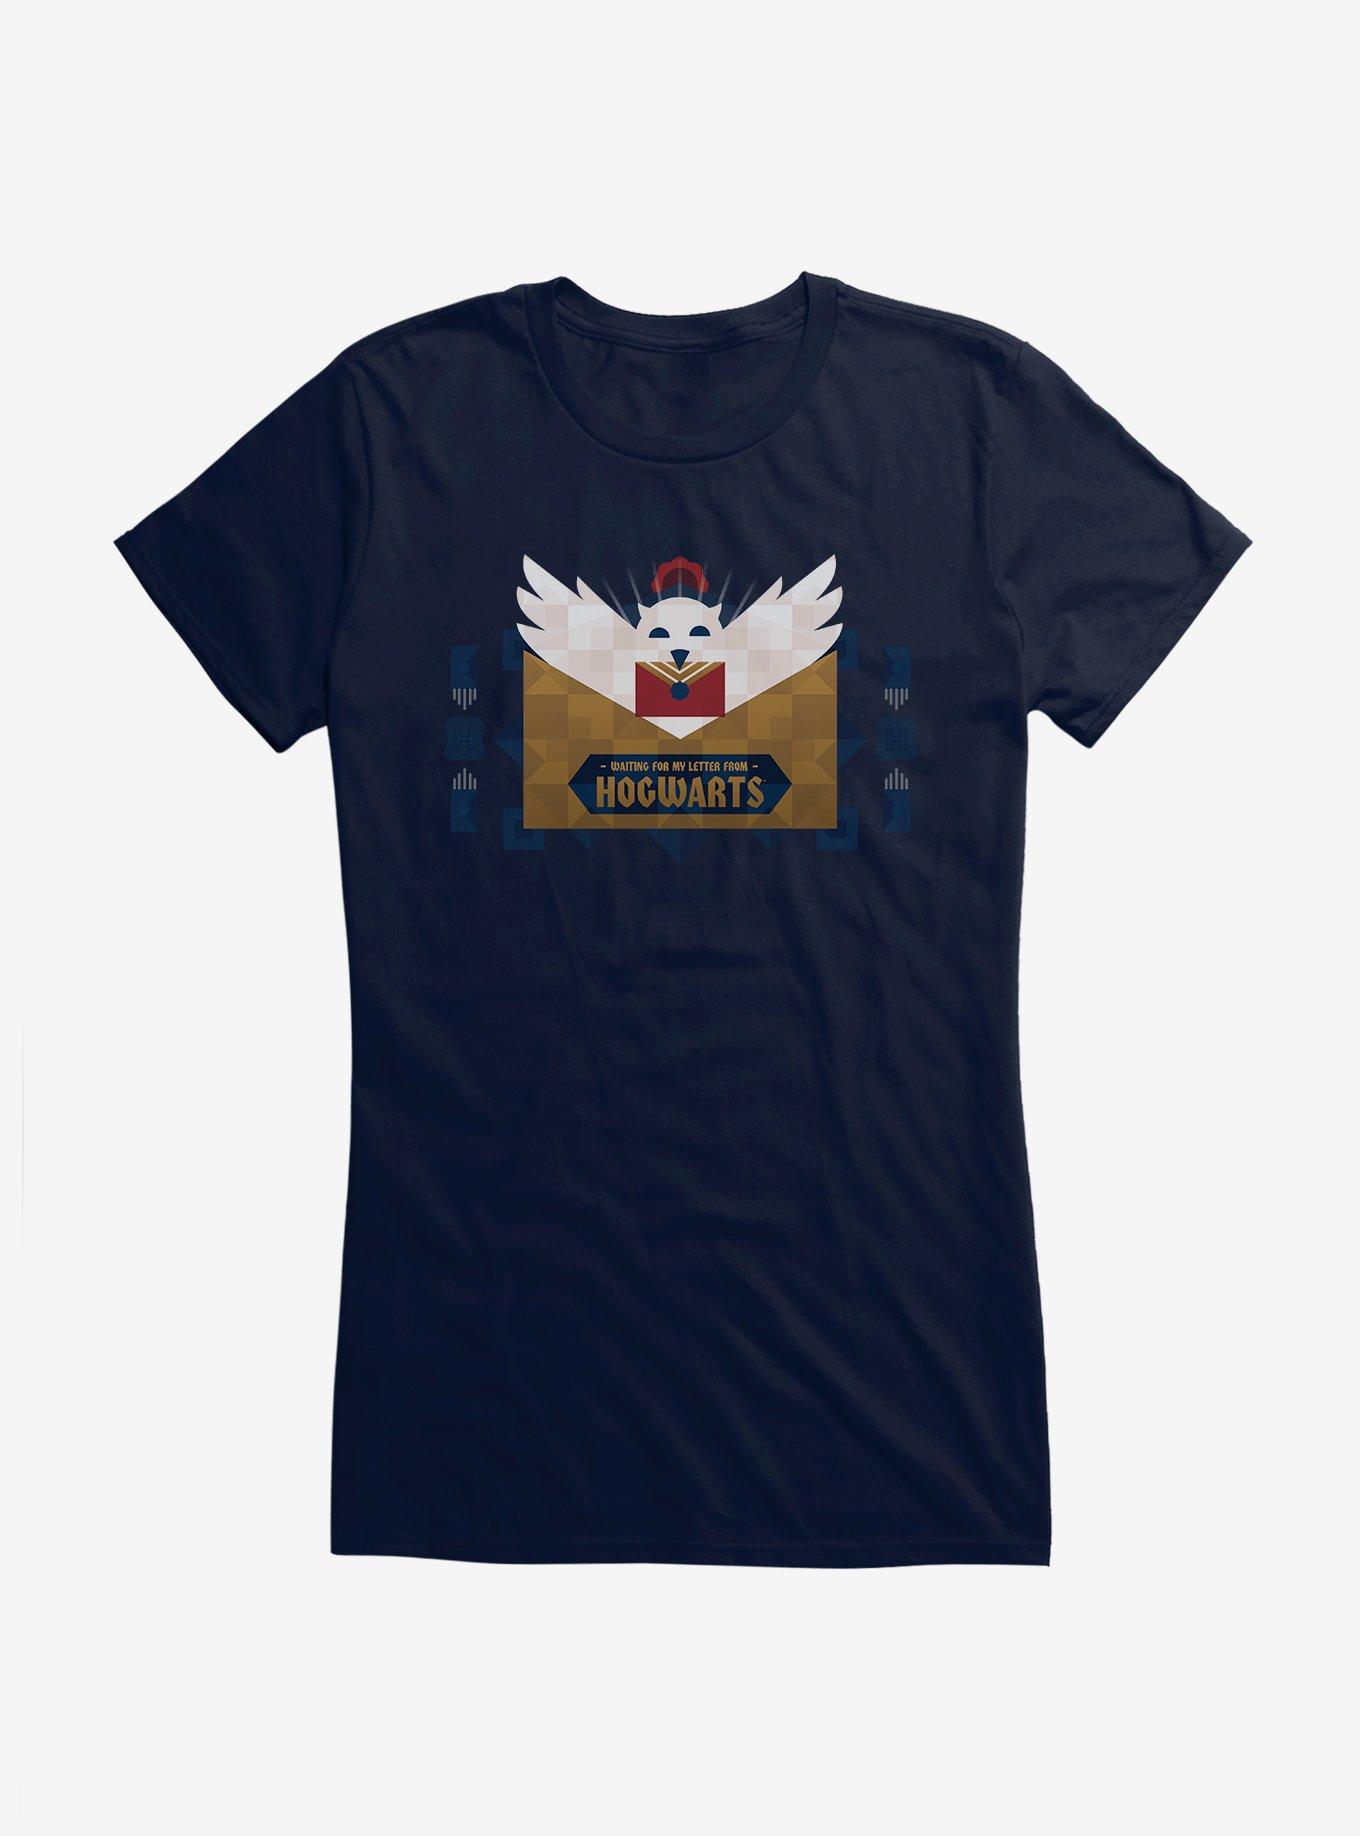 Harry Potter Waiting For My Letter From Hogwarts Girls T-Shirt